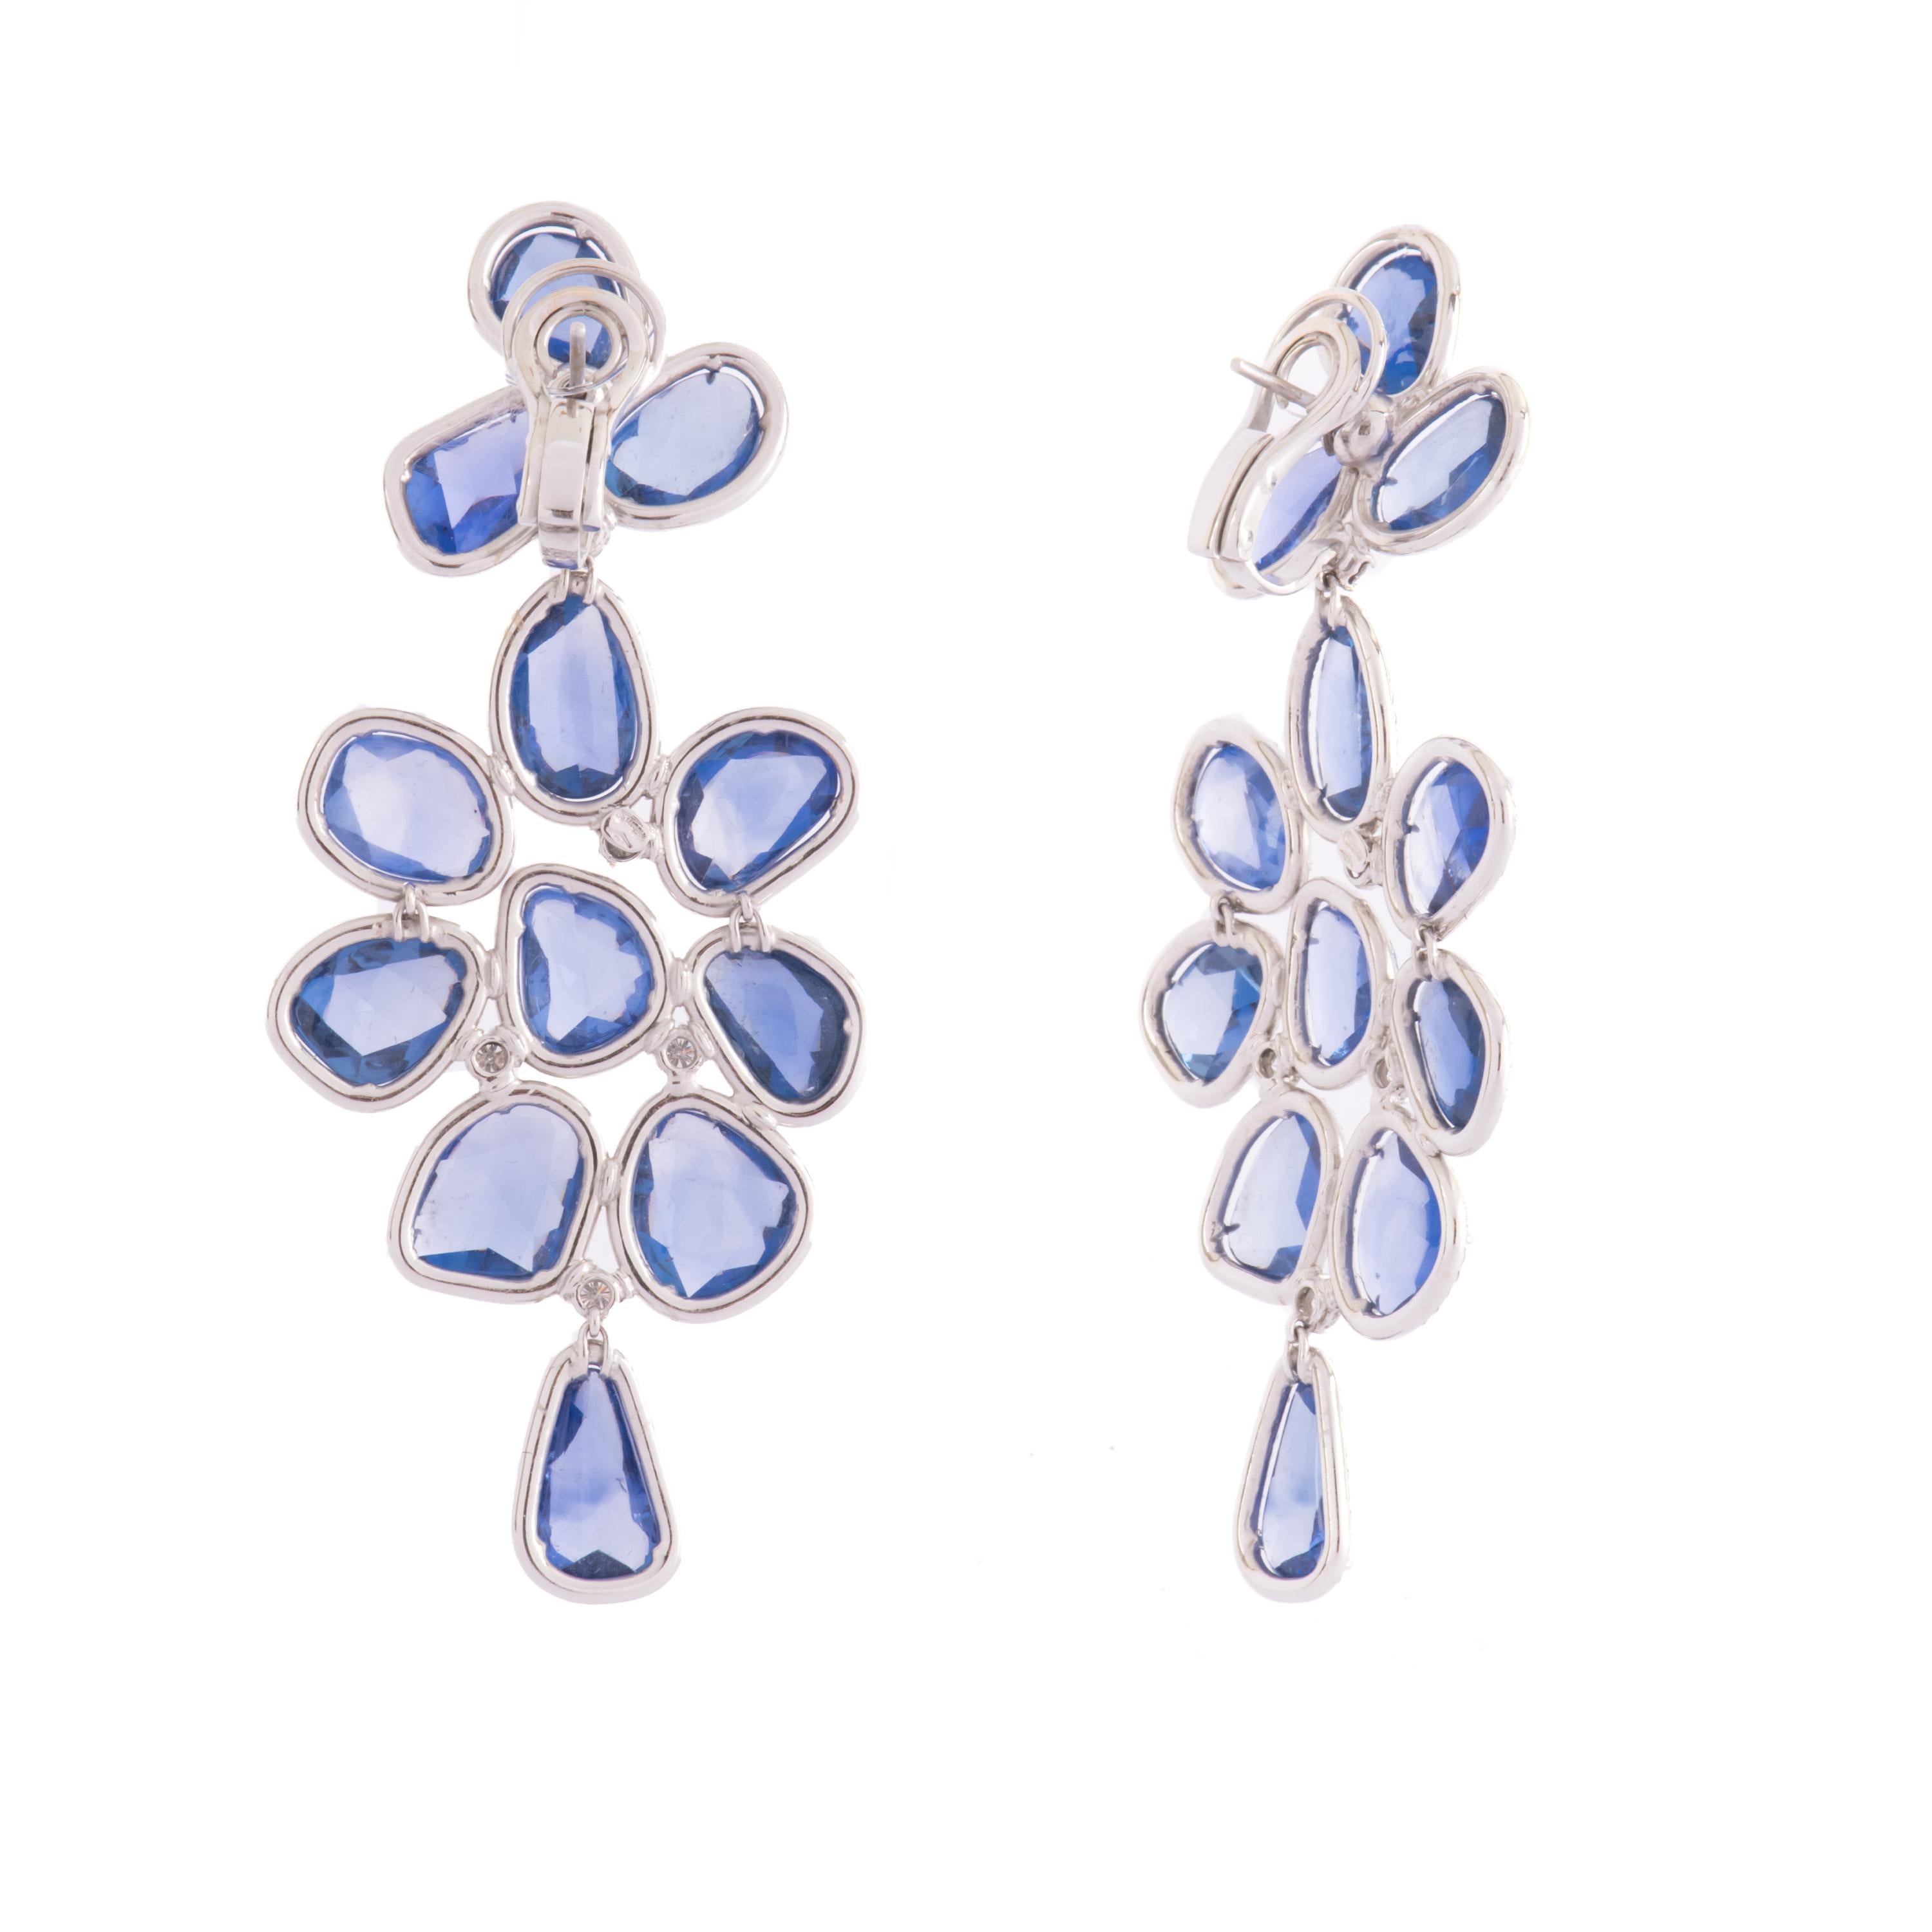 A gorgeous pair ofwhite gold chandelier earrings featuring blu sapphires flat cut ct. 50 and diamonds ct.4.39
Created by Enrico Trizio